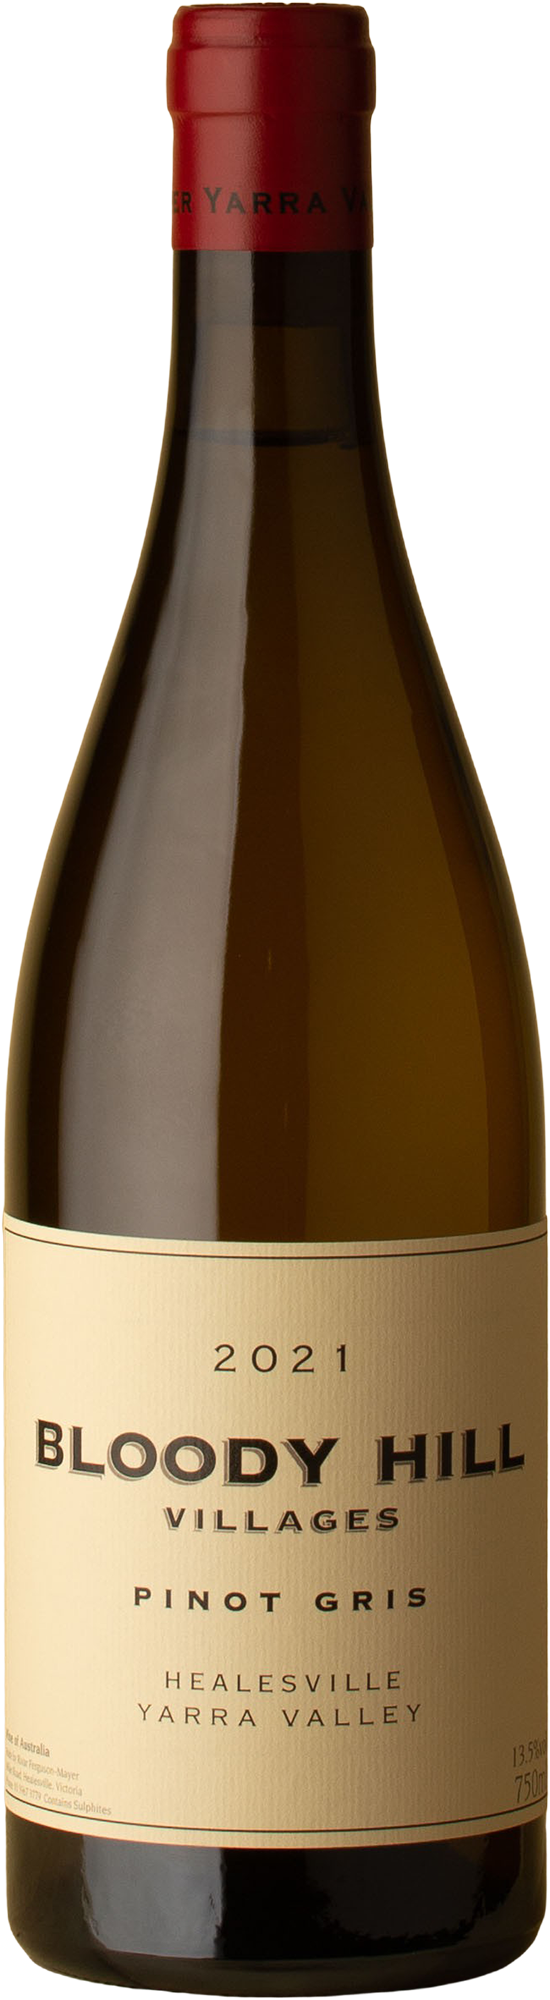 Mayer - Bloody Hill Villages Pinot Gris 2021